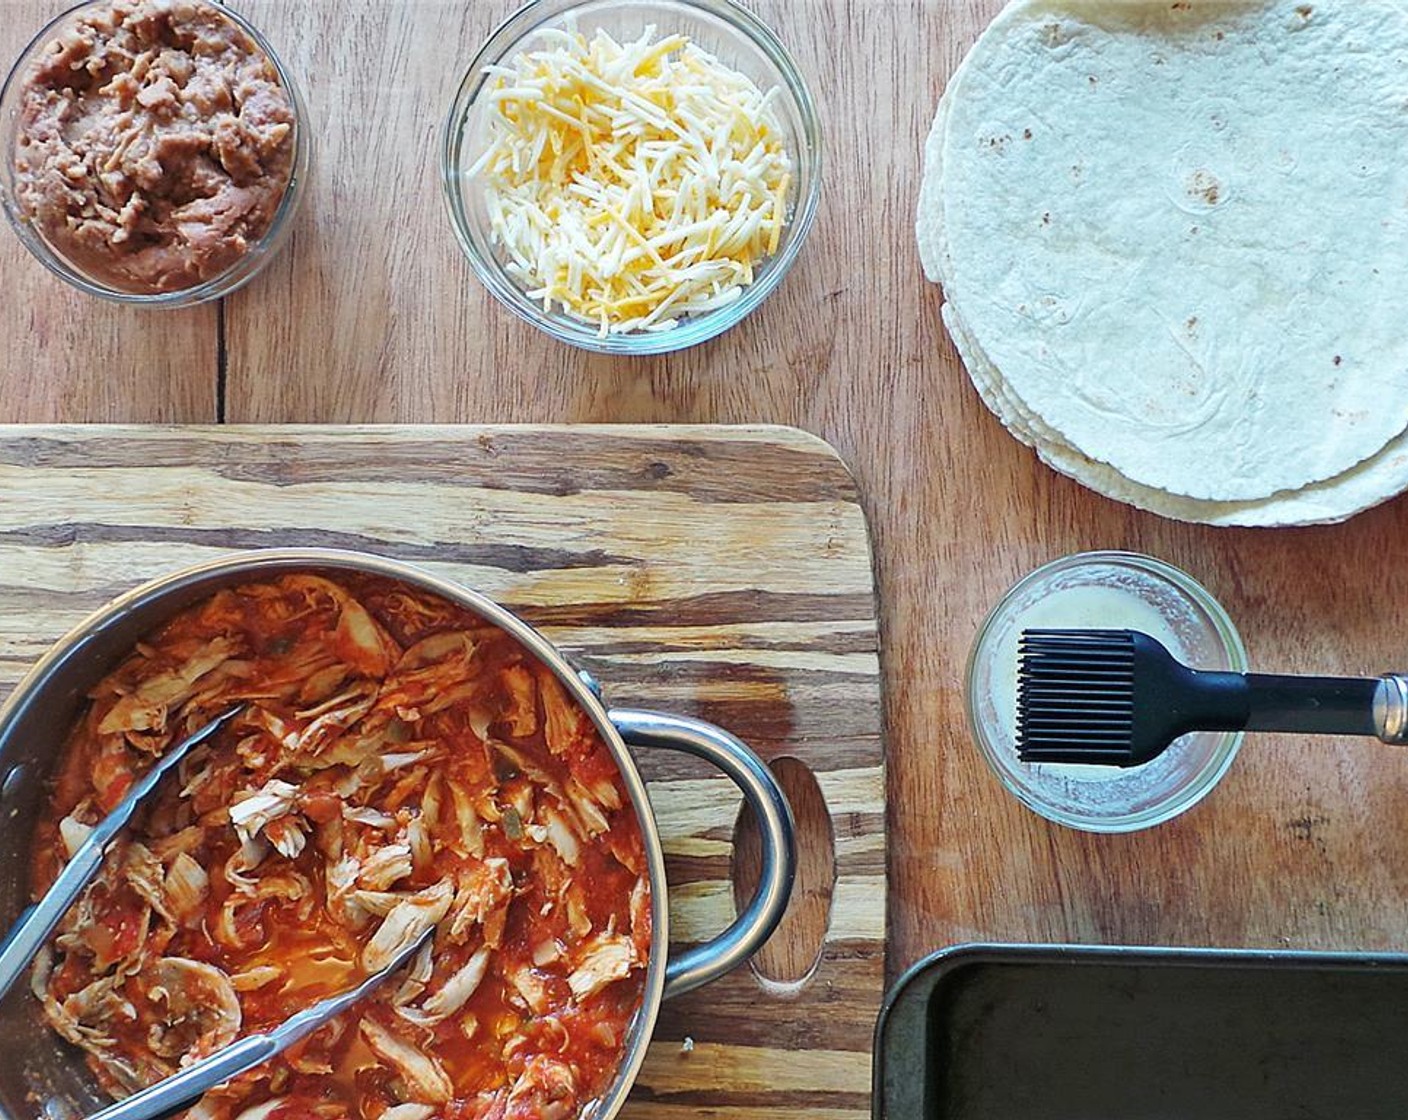 step 4 Place Refried Beans (1 can) in a microwave-safe bowl and microwave 1 minute. Remove chicken from stove and set up folding station with Flour Tortillas (8), refried beans, Monterey Jack Cheese (1 cup), and rotisserie chicken.